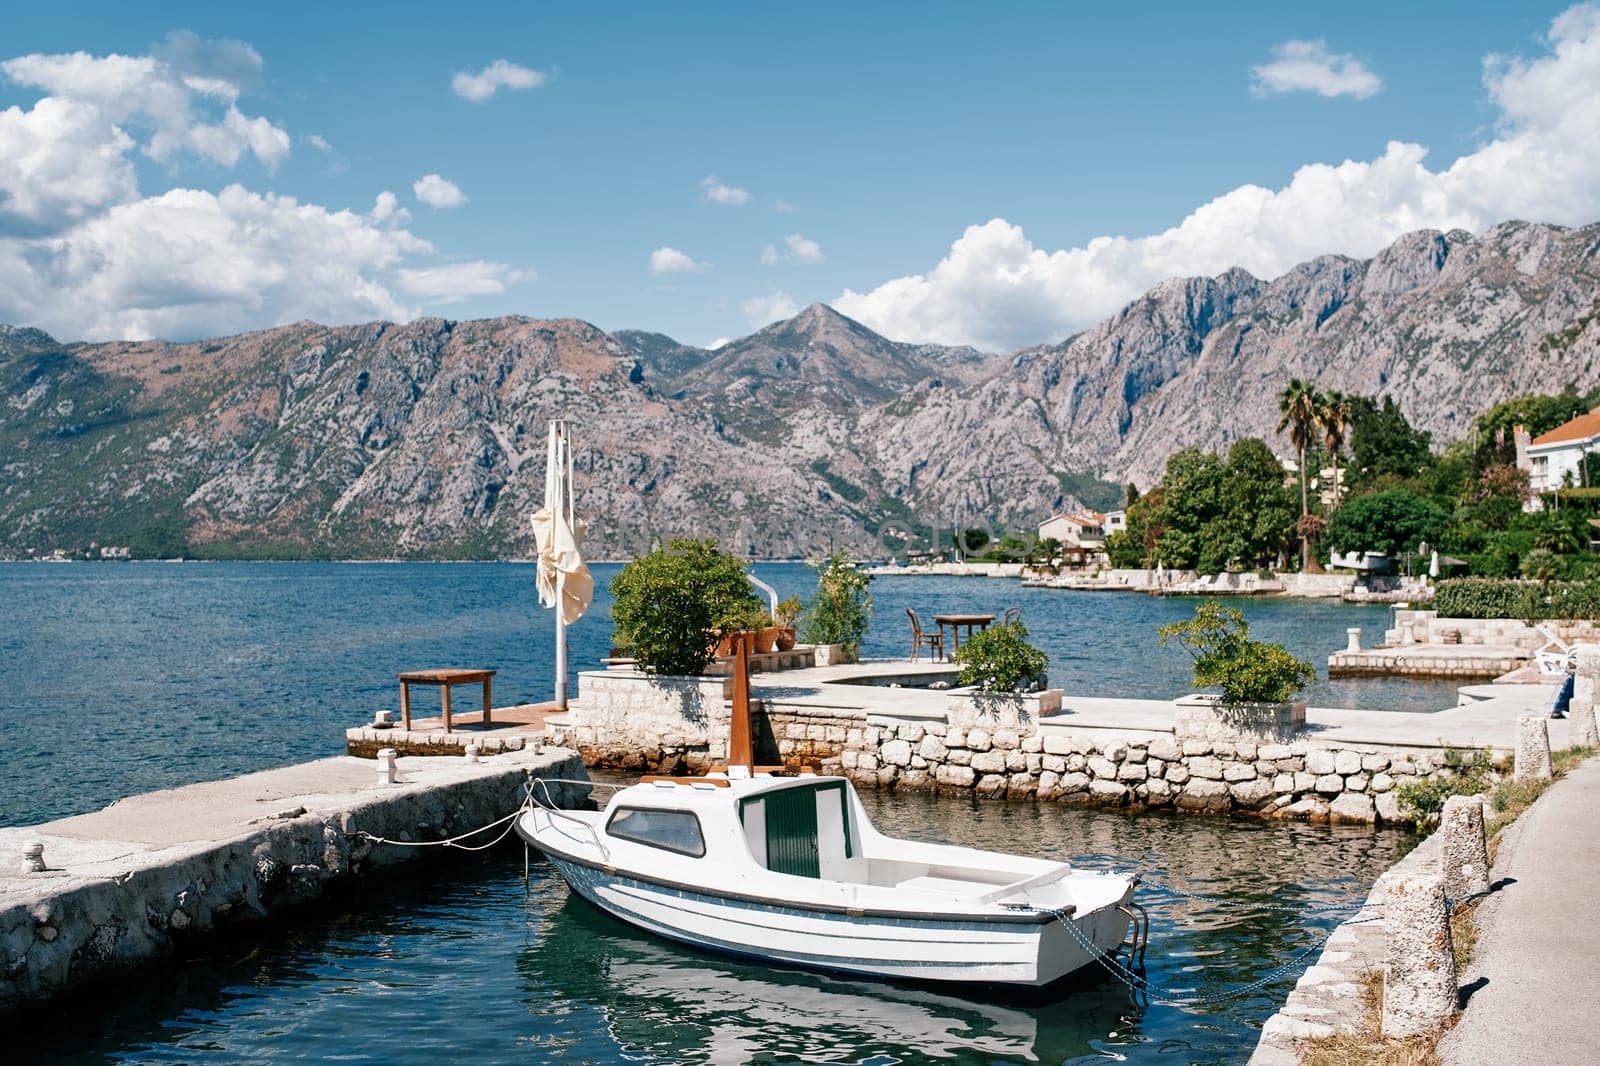 Small boat is moored at the stone pier of an ancient town at the foot of the mountains. Dobrota, Montenegro by Nadtochiy